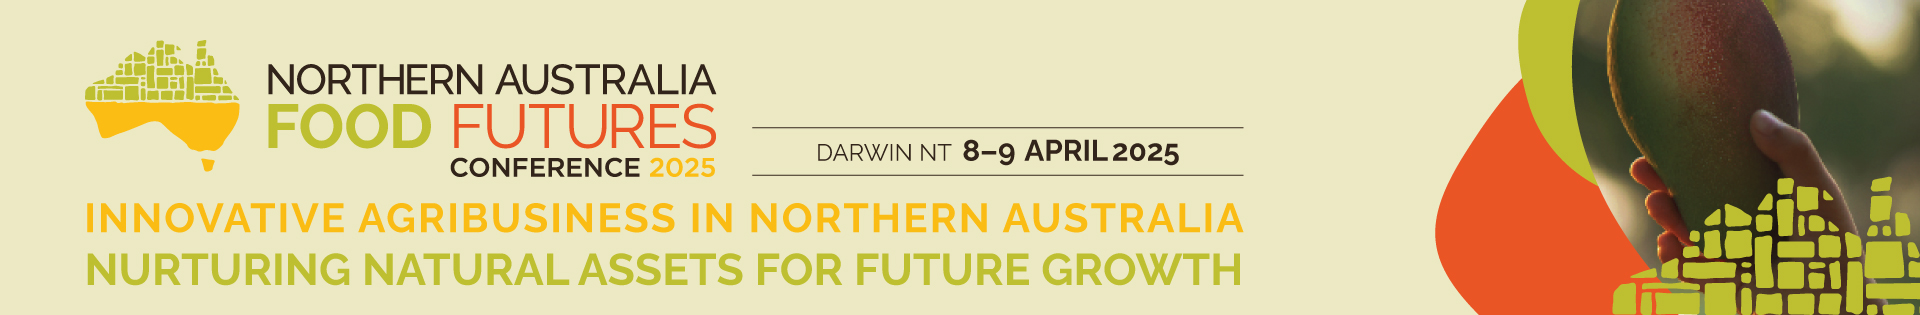 2025 Northern Australia Food Futures Conference